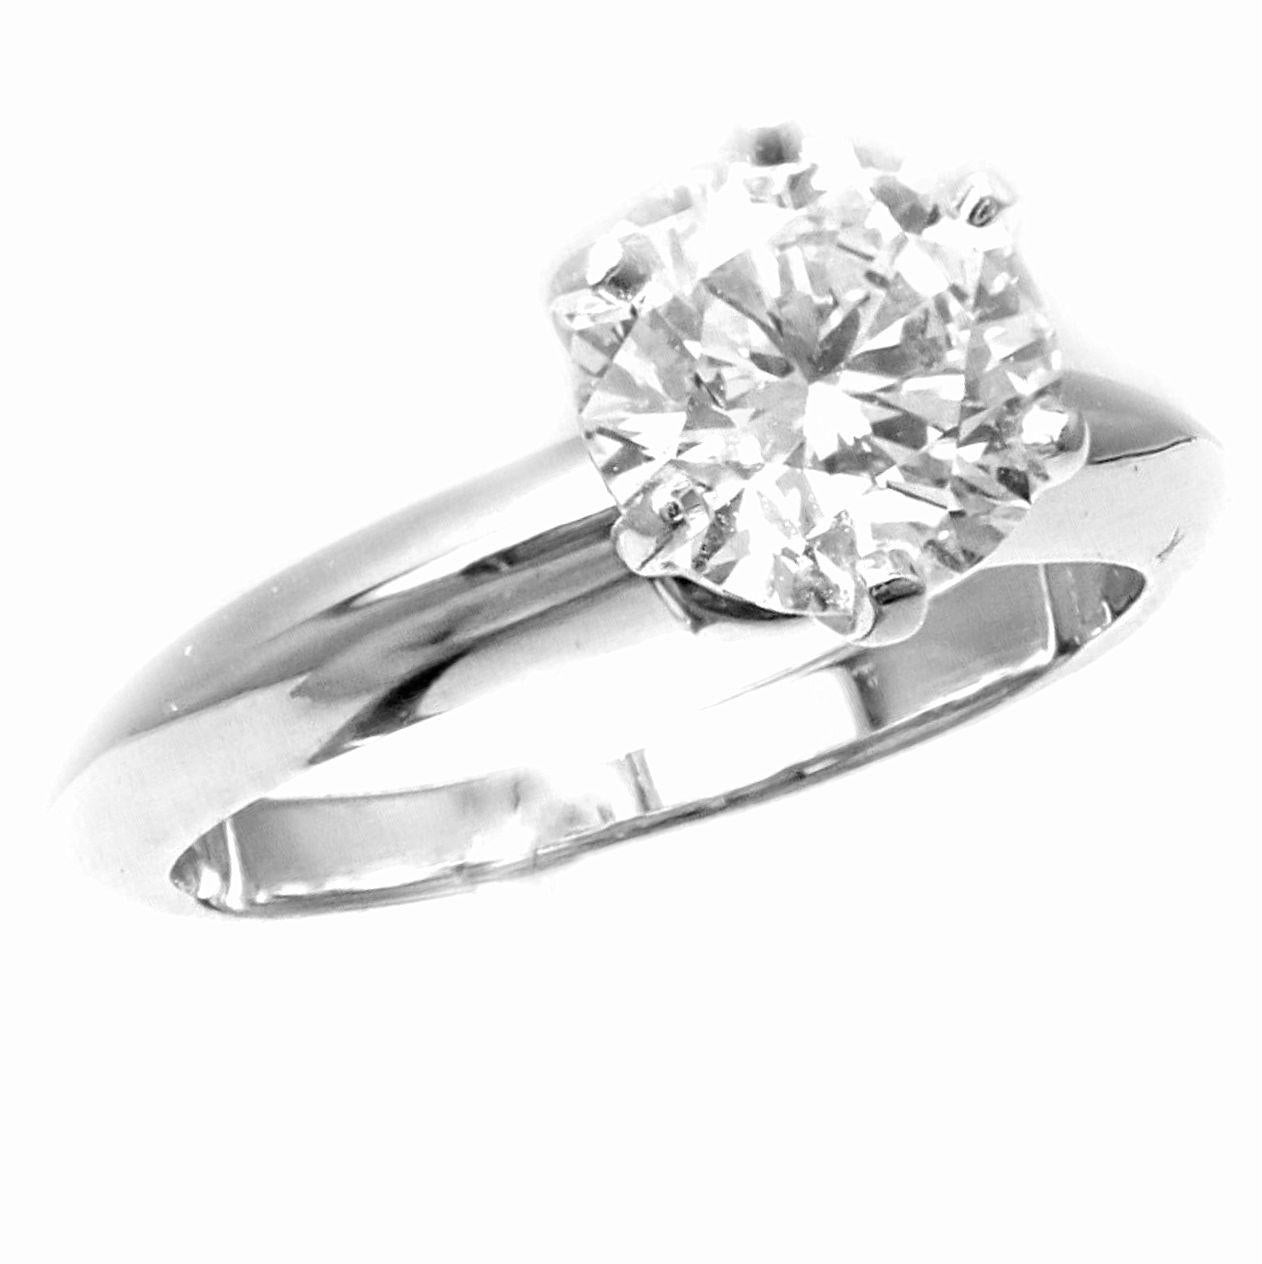 Platinum Diamond Engagement Ring by Tiffany & Co. 
With 1x Diamond
1.13ct clarity VS1, color H
Cut: Excellent
Polish: Excellent
Symmetry: Excellent
Fluorescence: NONE
Includes Tiffany & Co Diamond Certificate and a Box.
Details:
Ring Size: 5, Resize